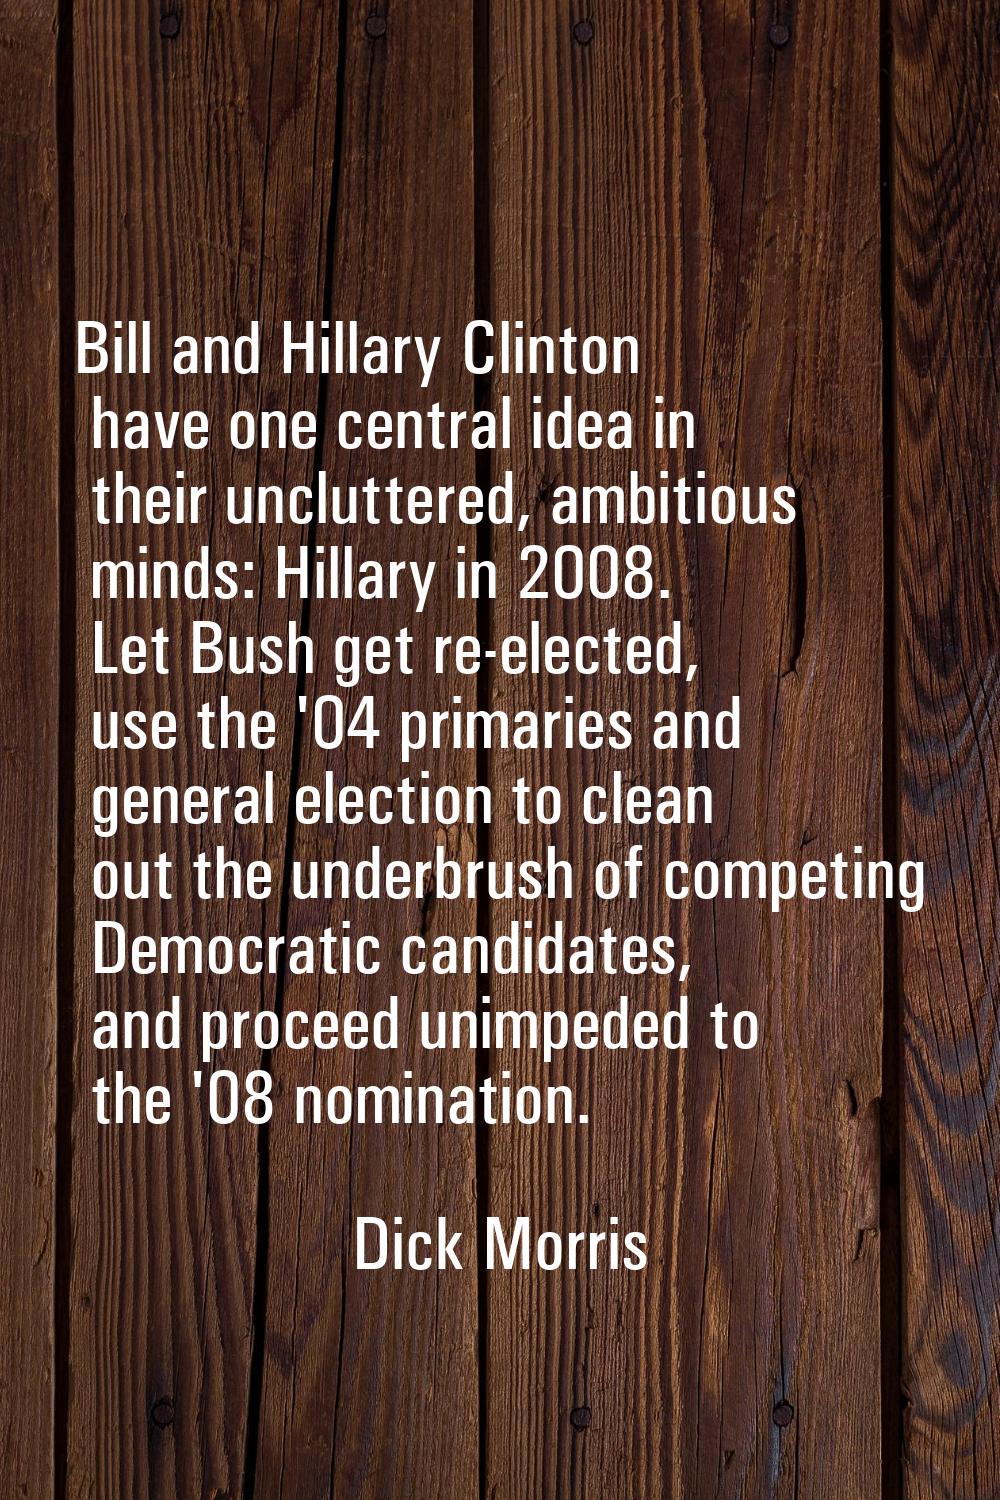 Bill and Hillary Clinton have one central idea in their uncluttered, ambitious minds: Hillary in 20